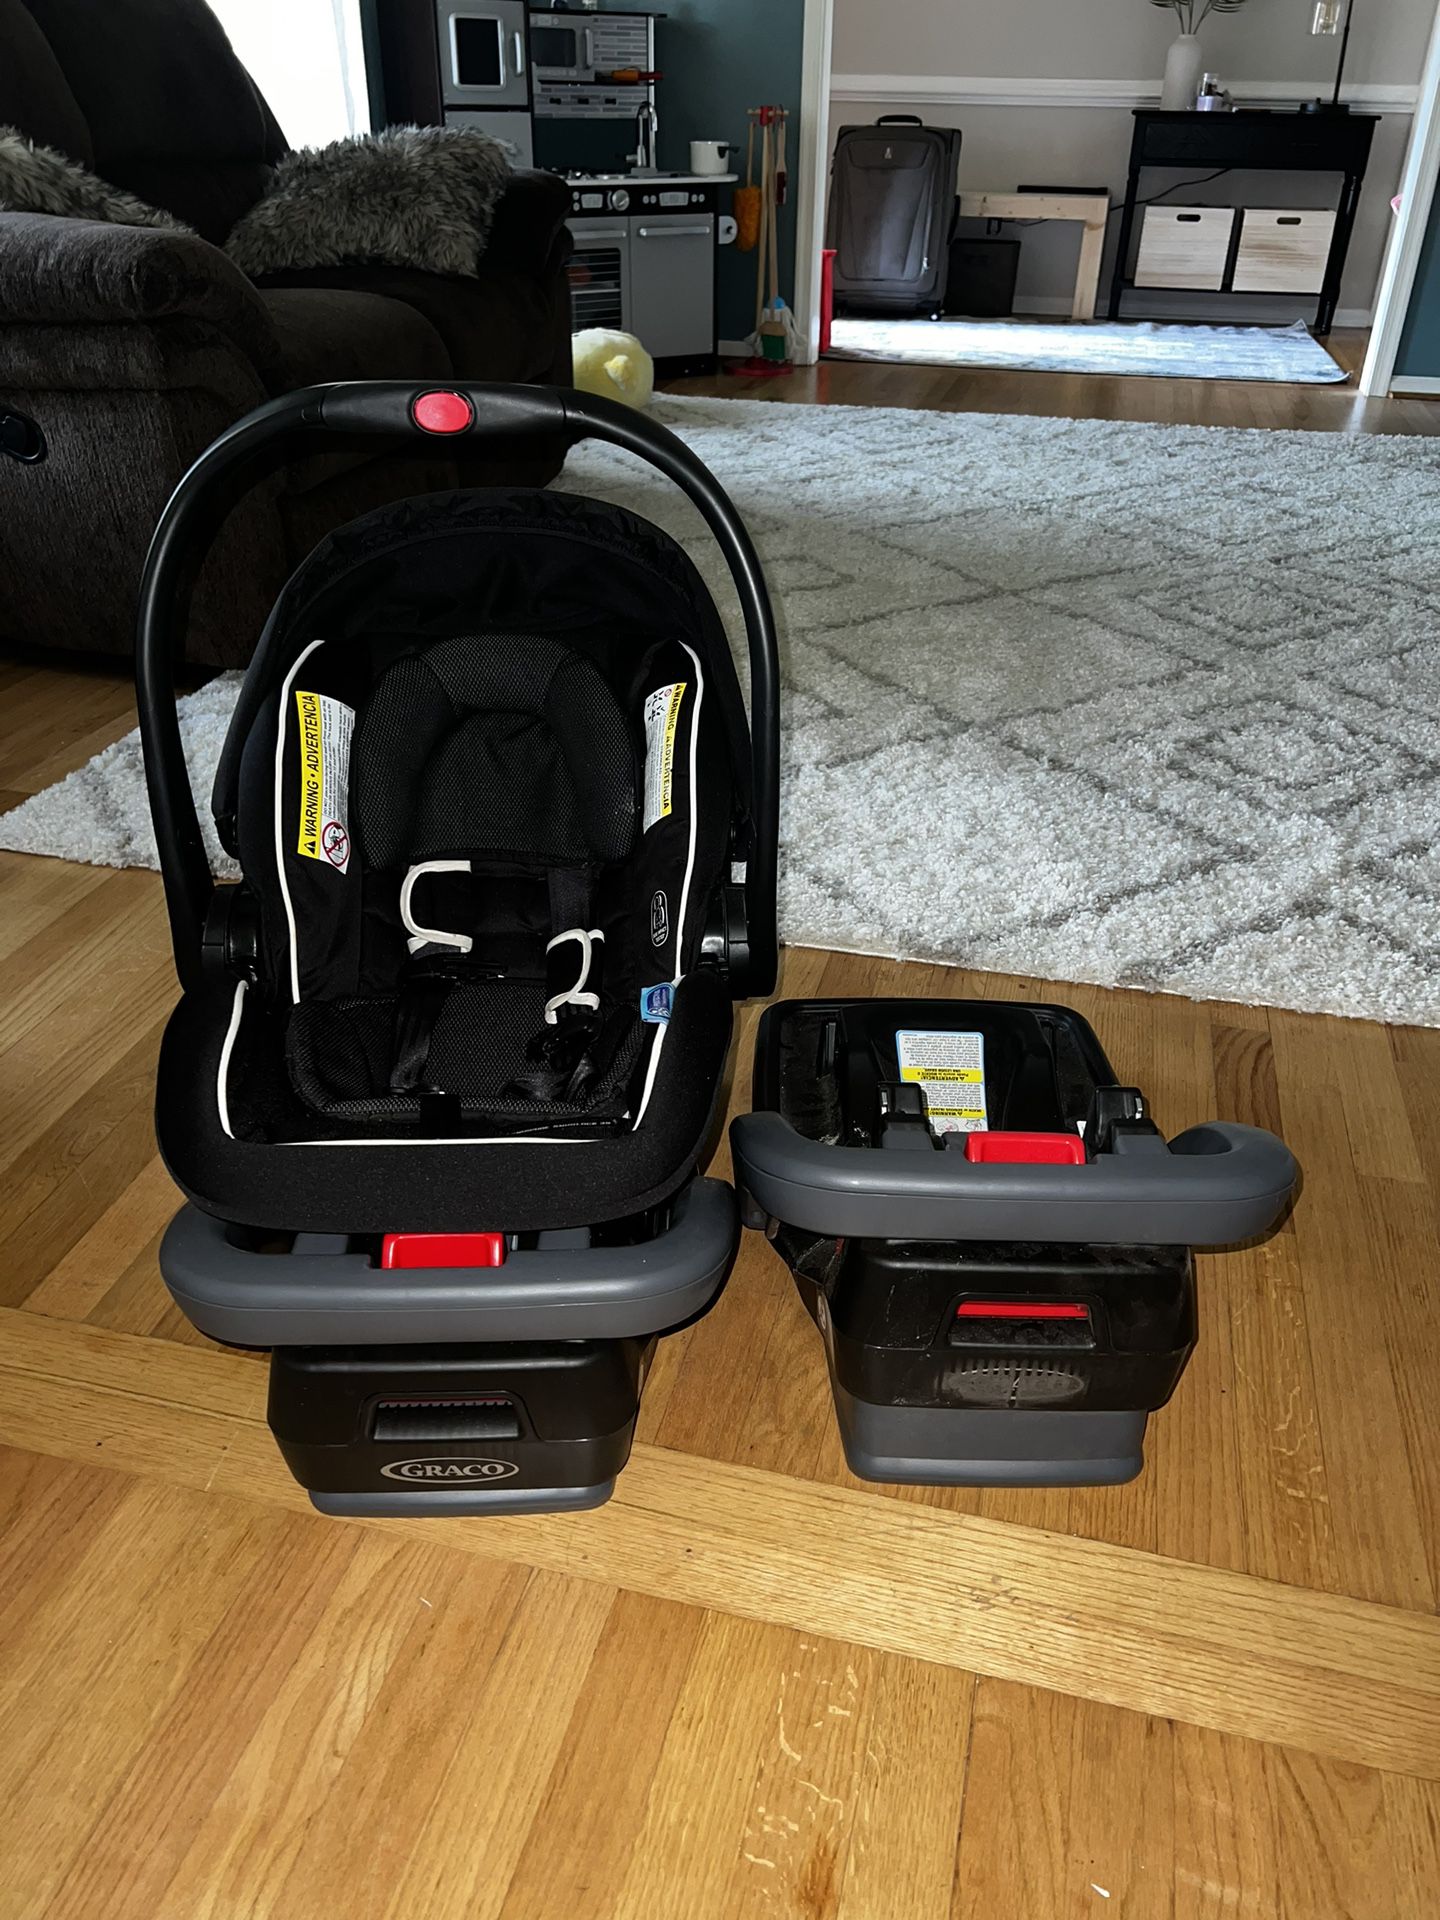 Graco Infant Carseat And 2 Bases